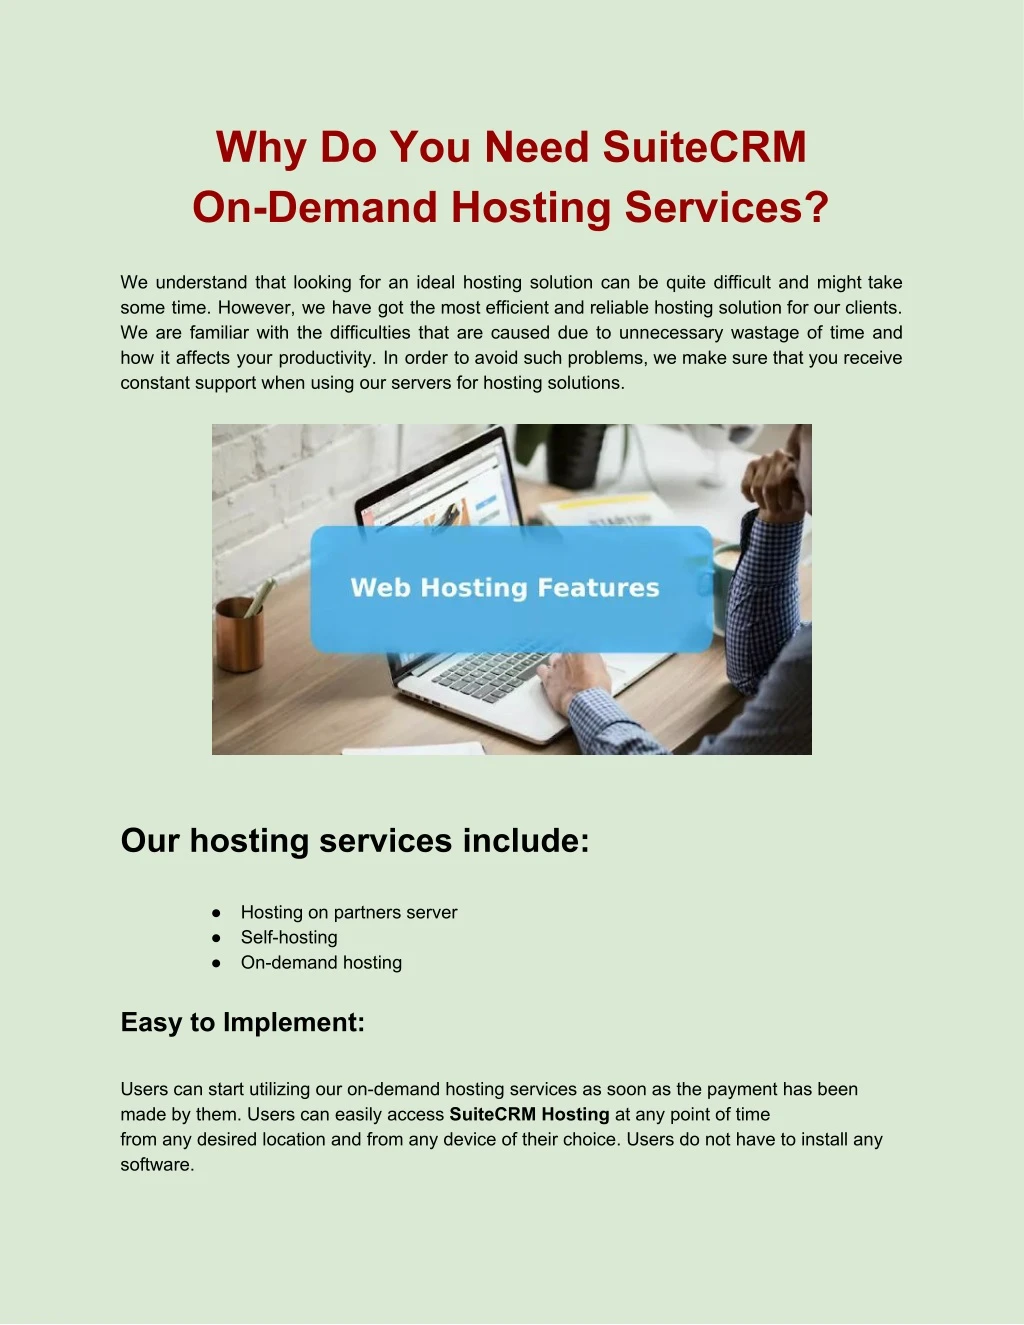 why do you need suitecrm on demand hosting